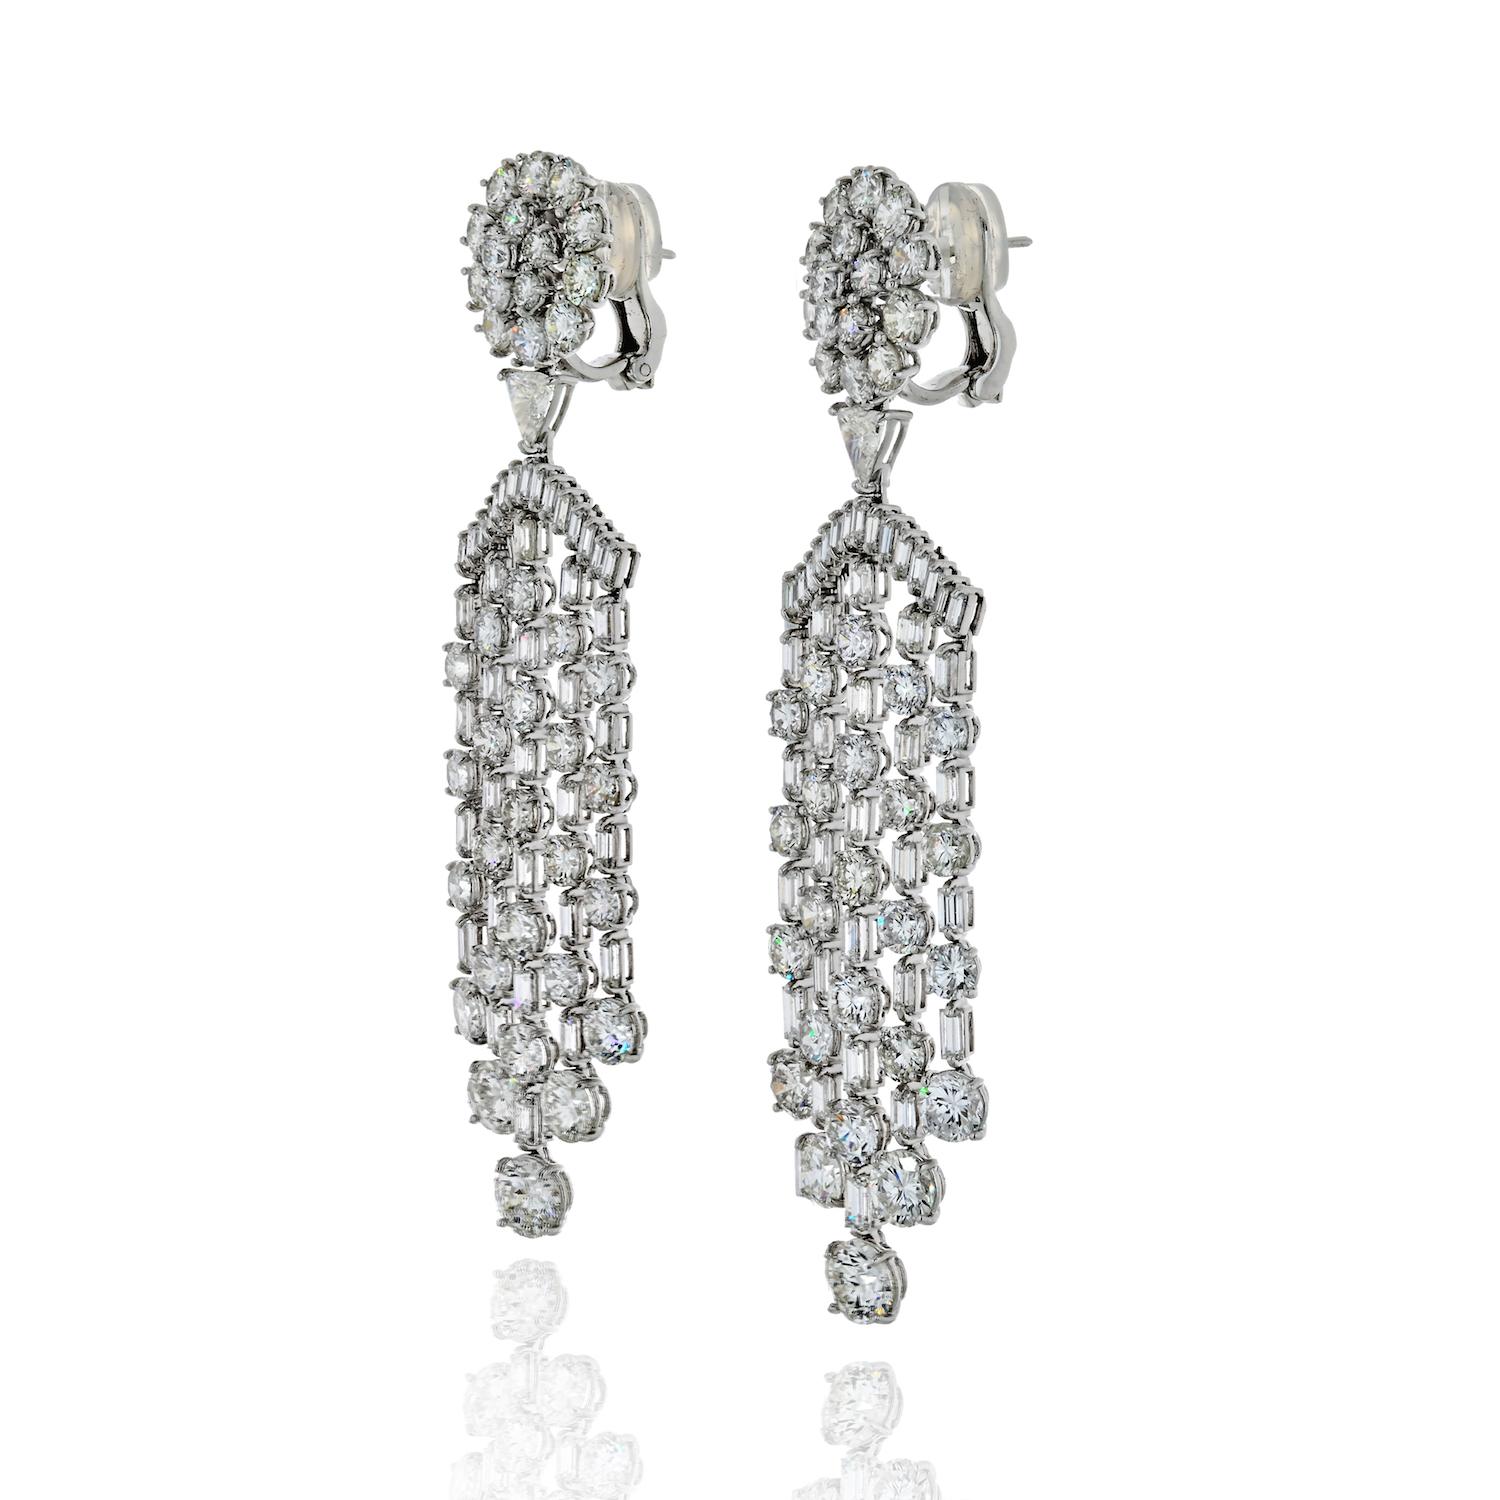 A stunning cascade of round and baguette-cut diamonds forming a dramatic chandelier drop earring that will turn heads.

Length measures approximately 83mm from top to bottom, and approximately 24mm wide.
These gorgeous chandelier earrings have